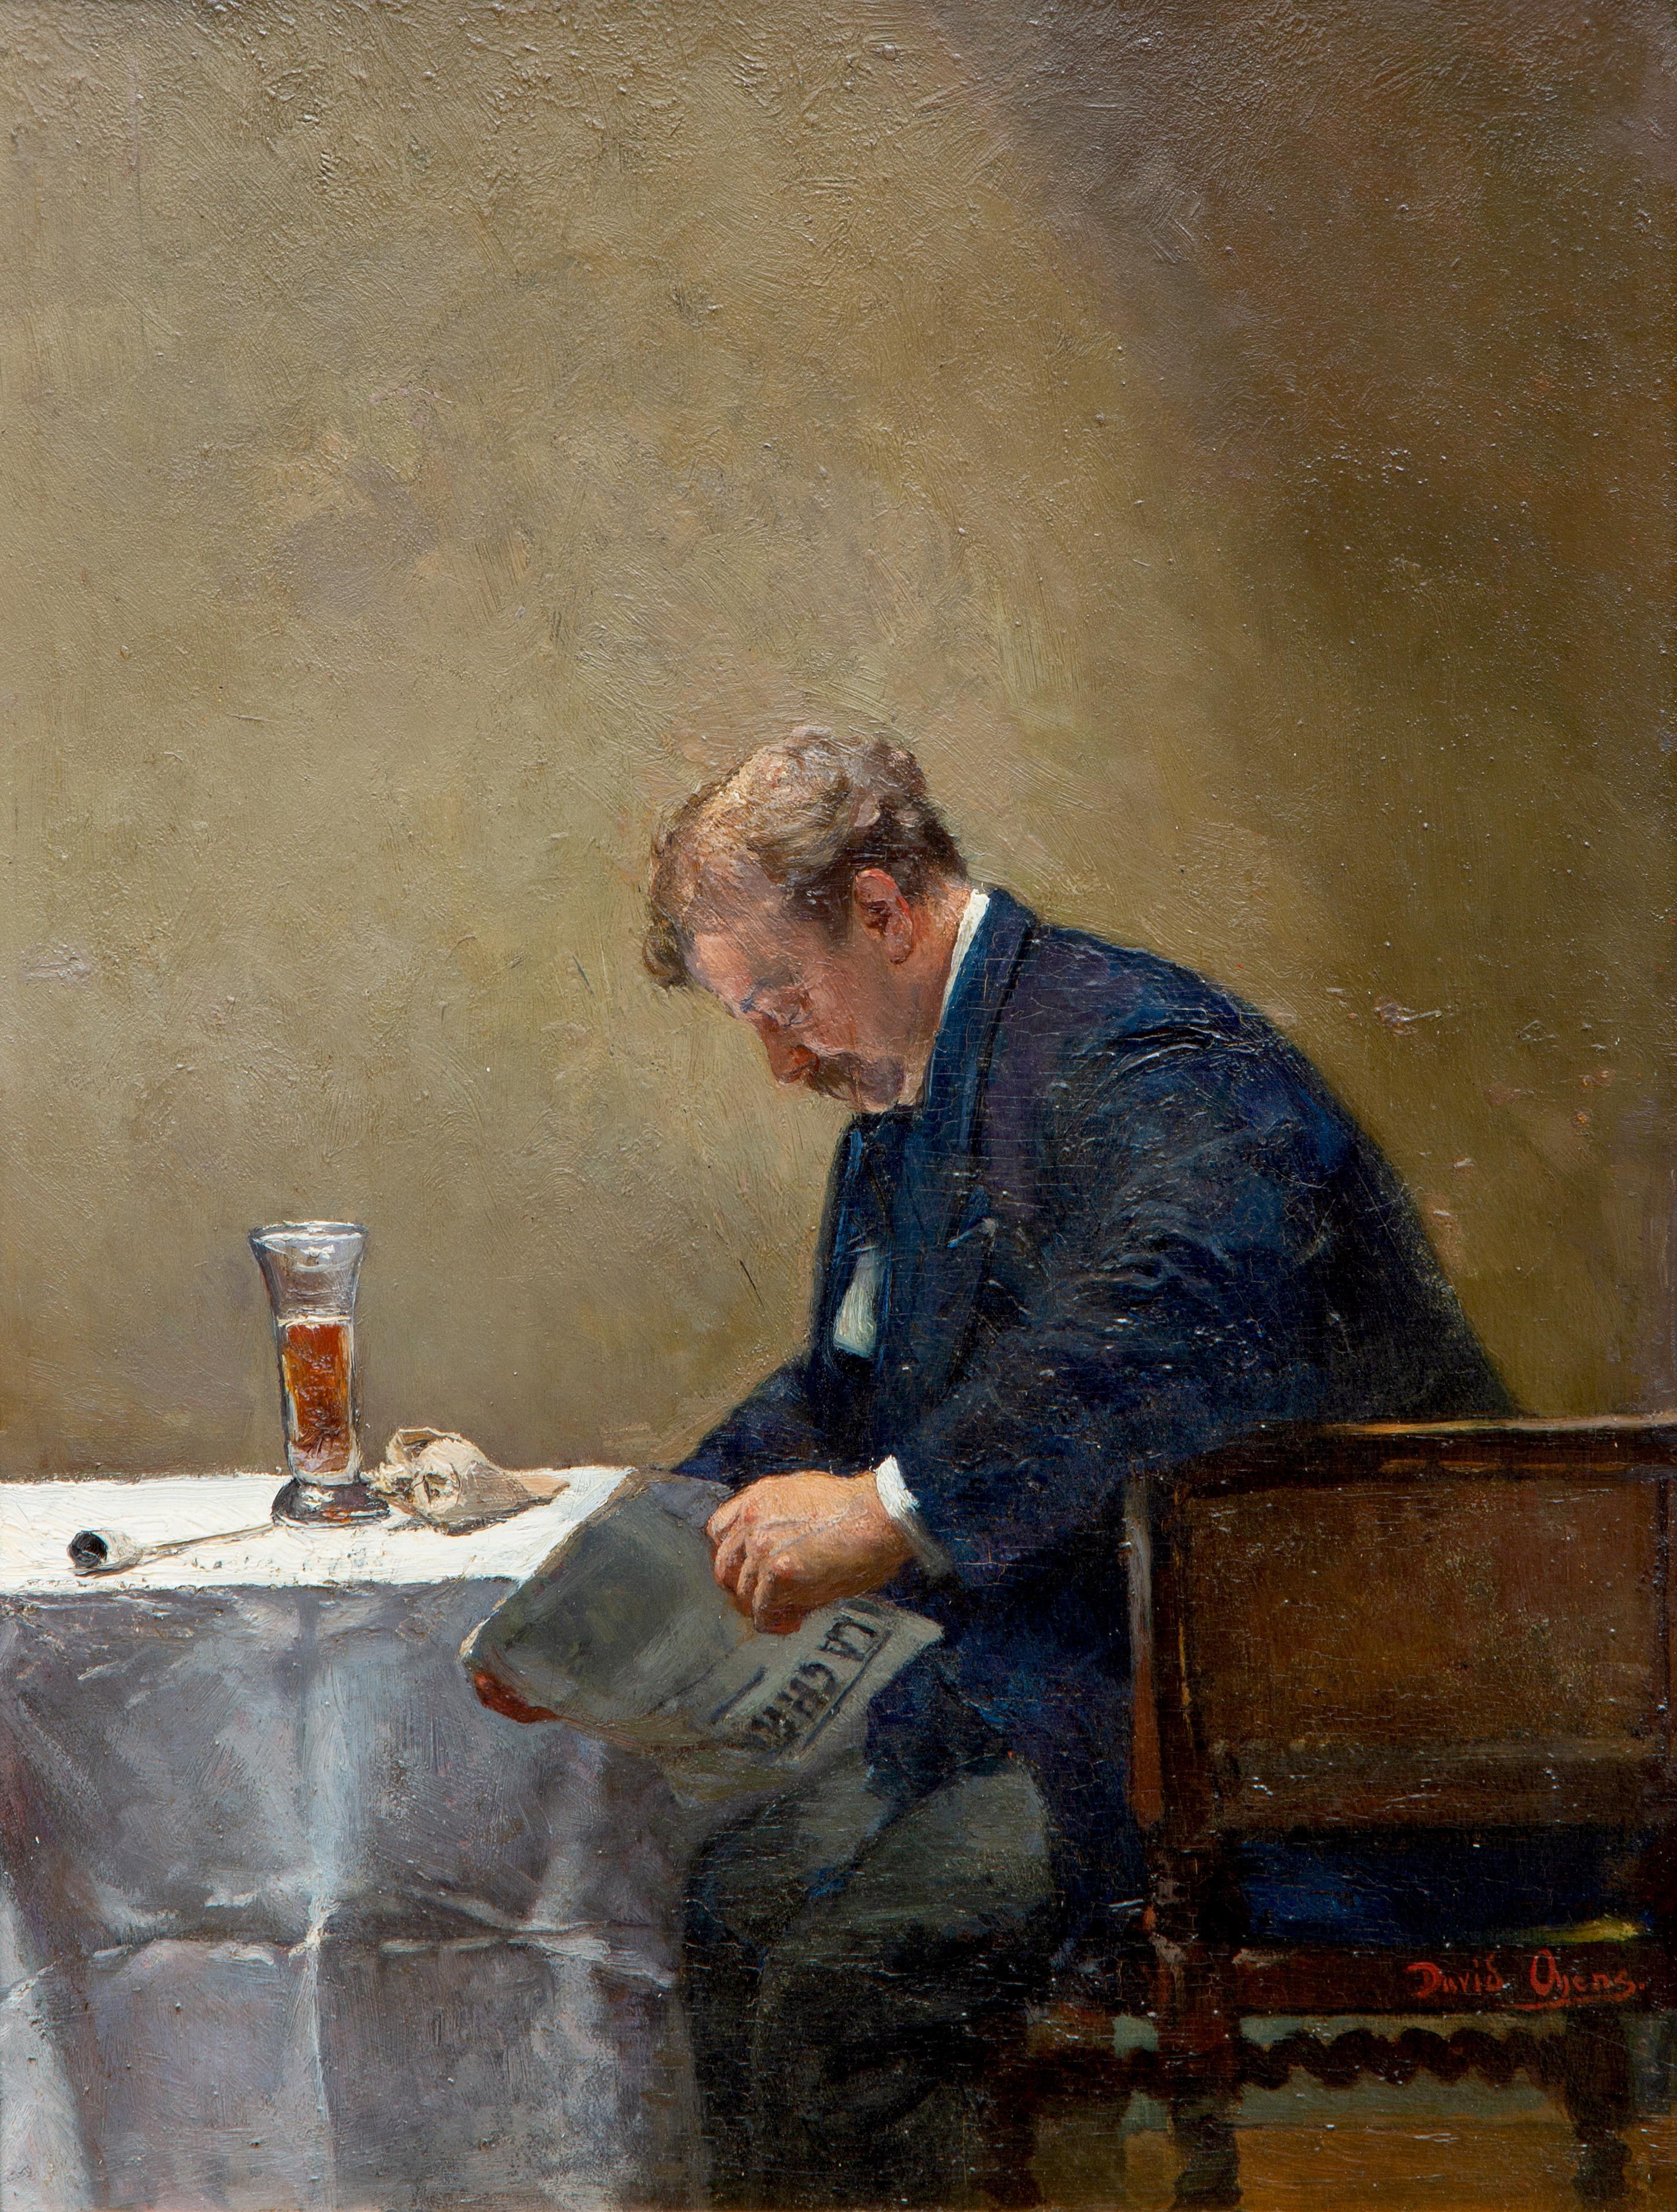 The artist enjoying the newspaper and his glass of beer